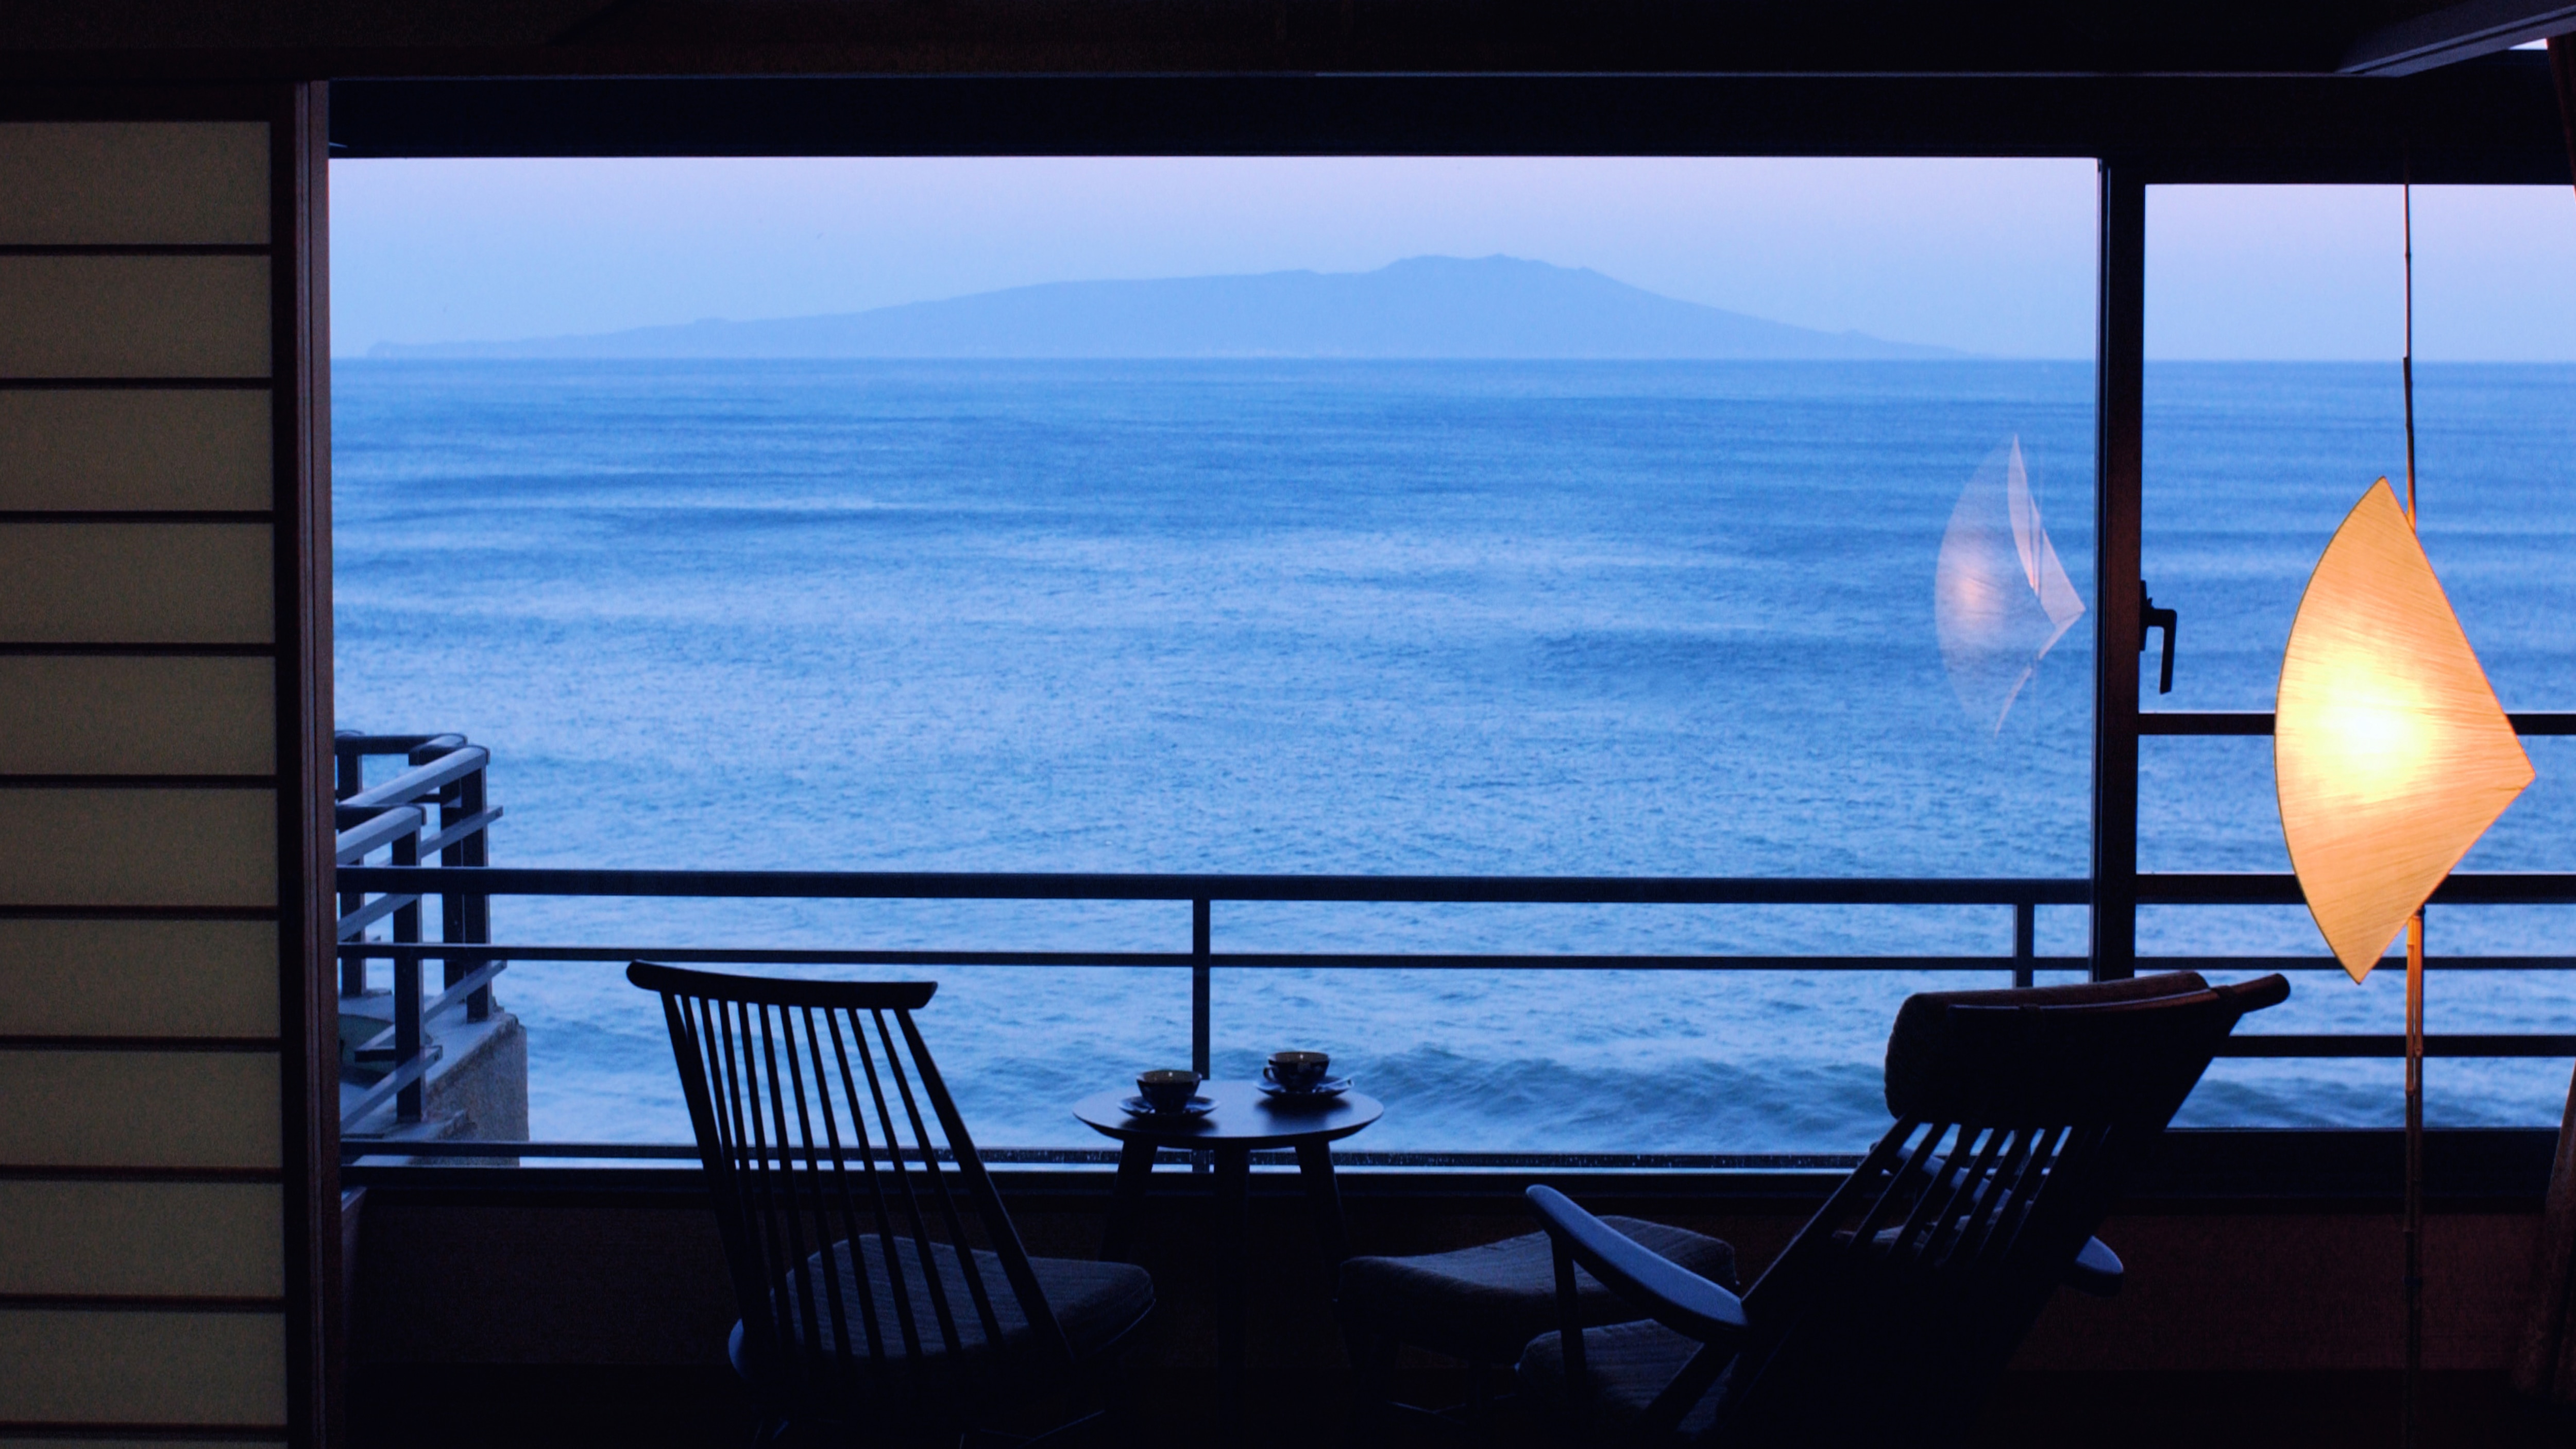 7th floor on the top floor / 10 tatami Japanese-style room with a spectacular view of Oshima and the sea + wide rim